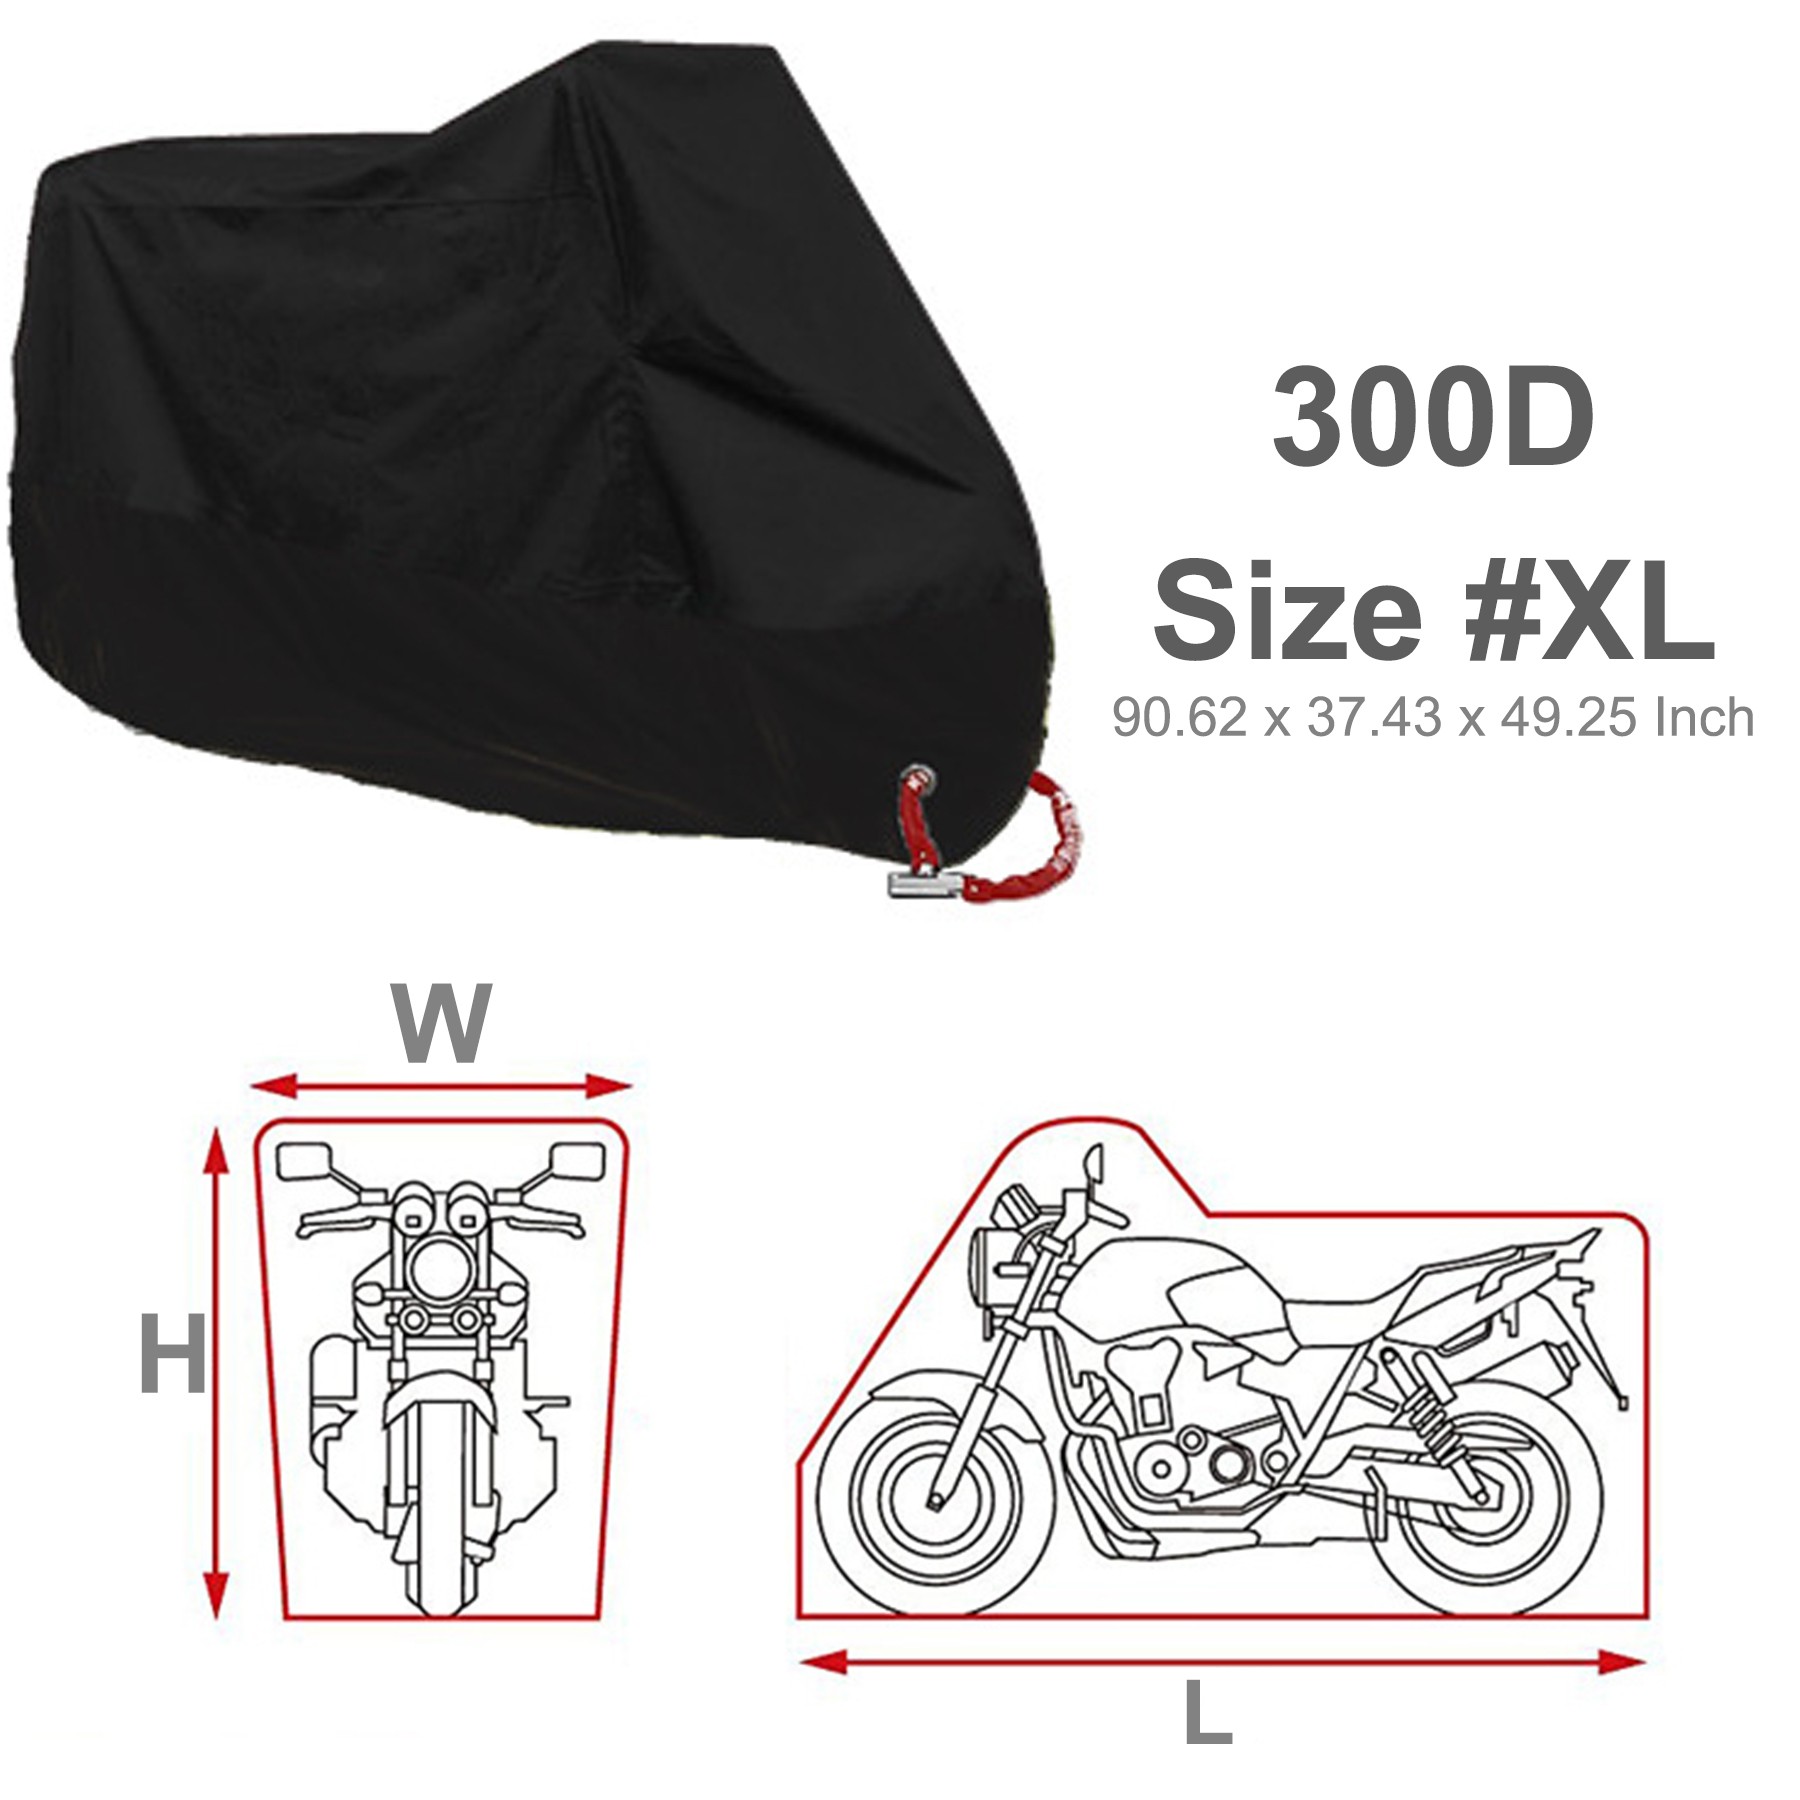 Motowolf Protection Cover with Lock Hole for Motorcycle Waterproof Dustproof Cover Motorbike 190T Cover